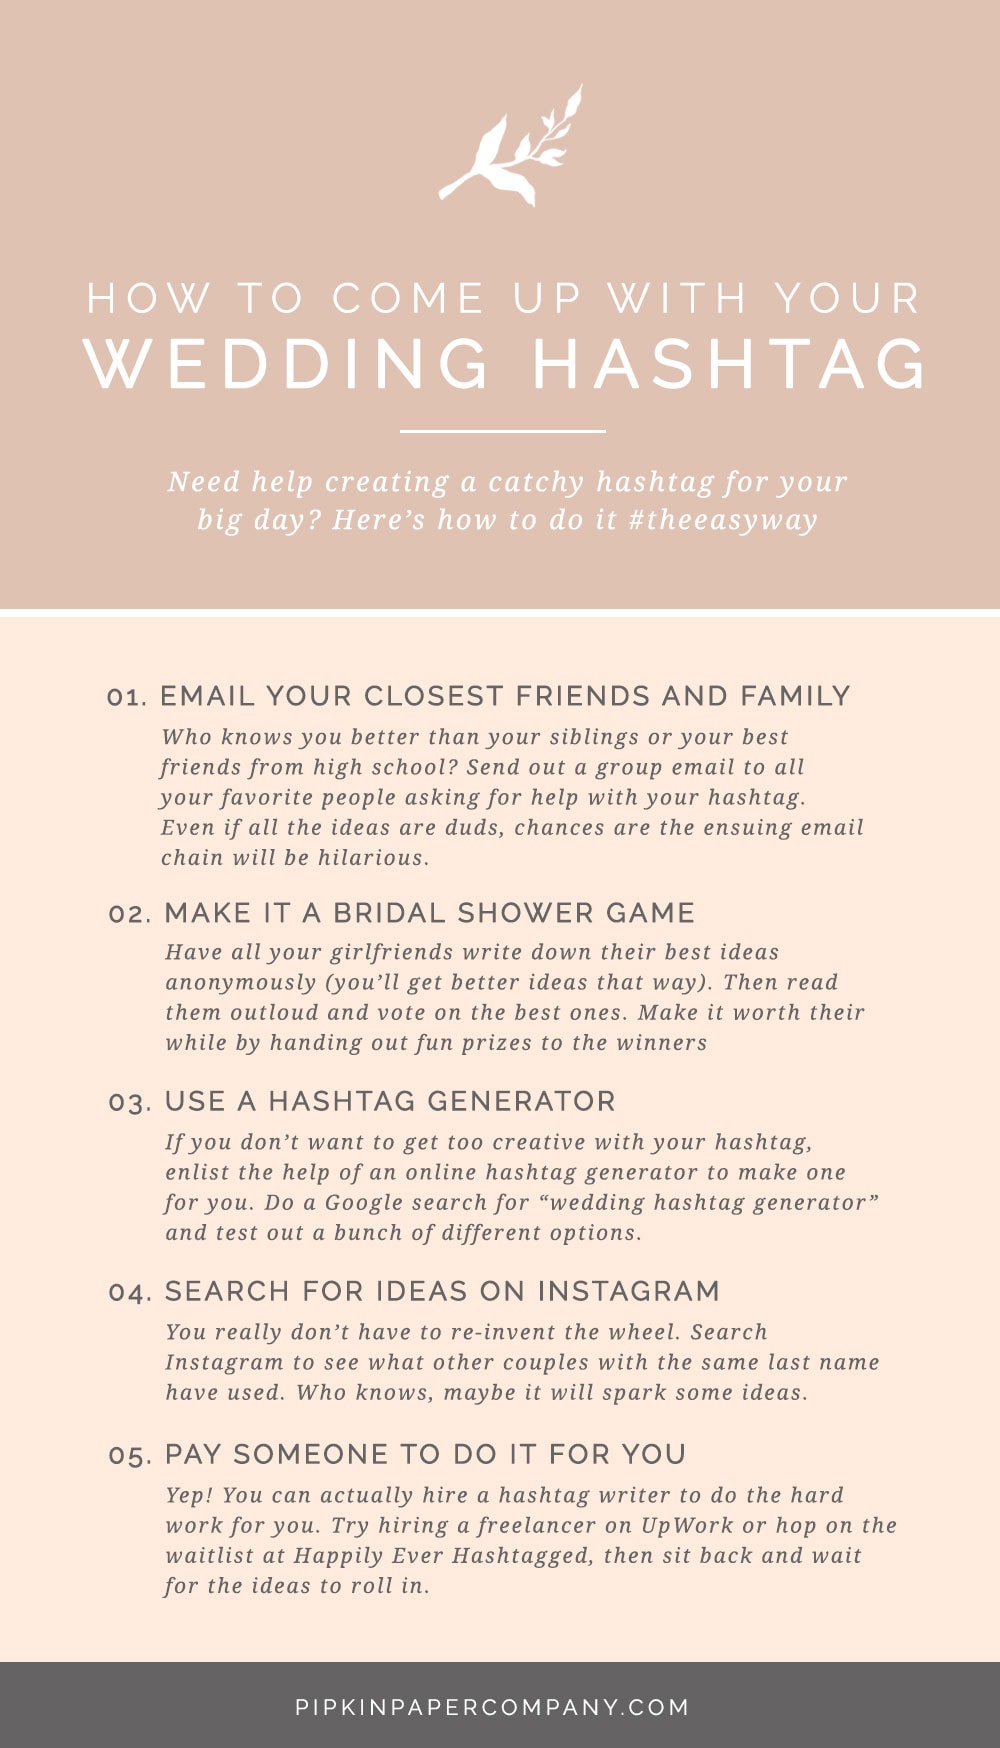 How to create a hashtag for your wedding -- the easy way.